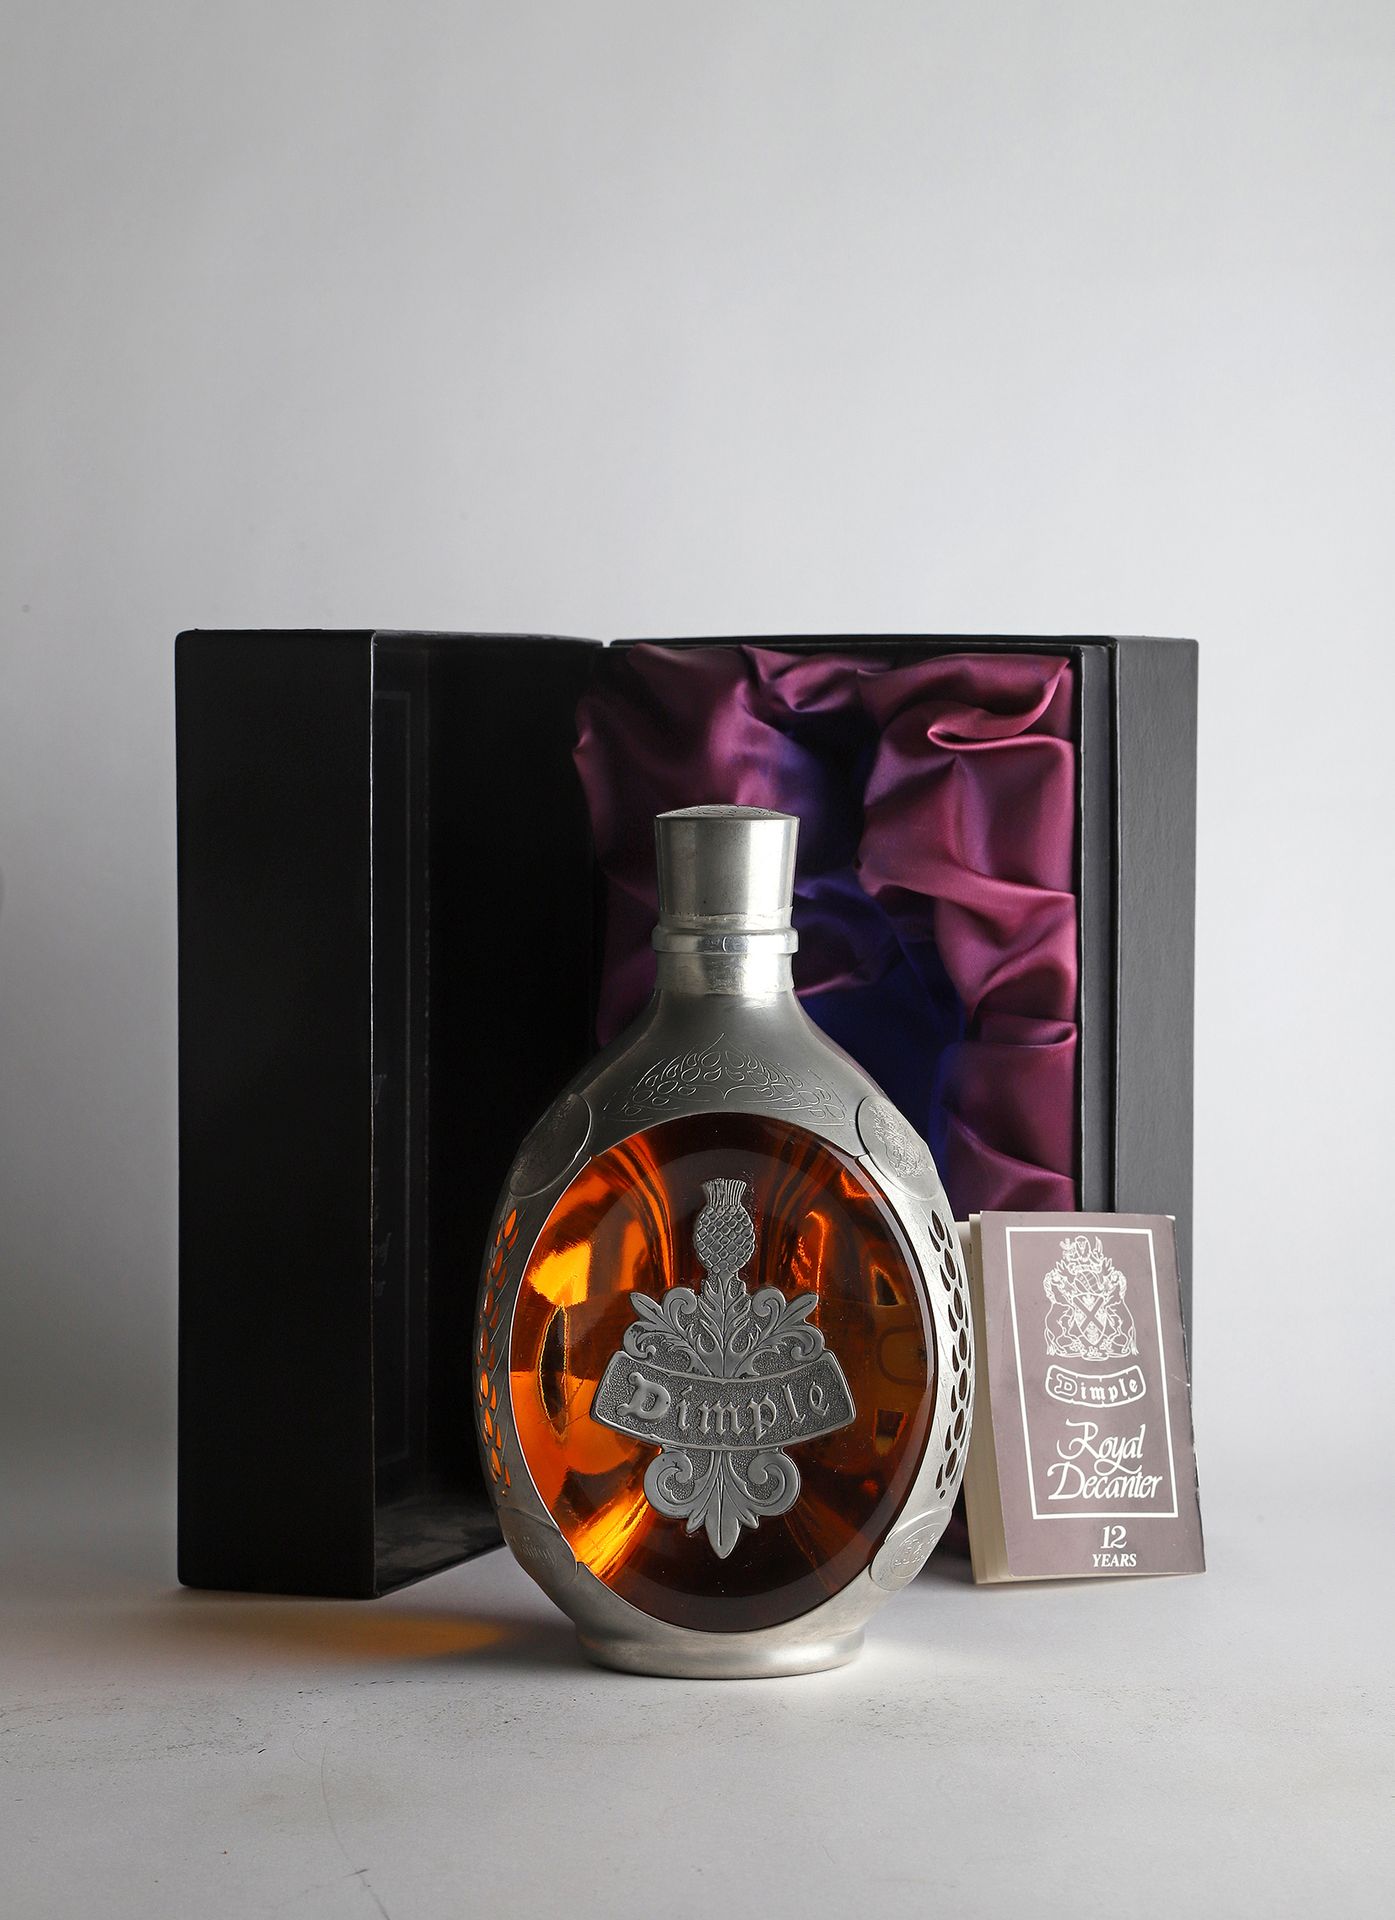 Null 1 B WHISKY ROYAL DECANTER 12 YEARS OLD 75 cl 43% (原包装) - NM - 酒窝